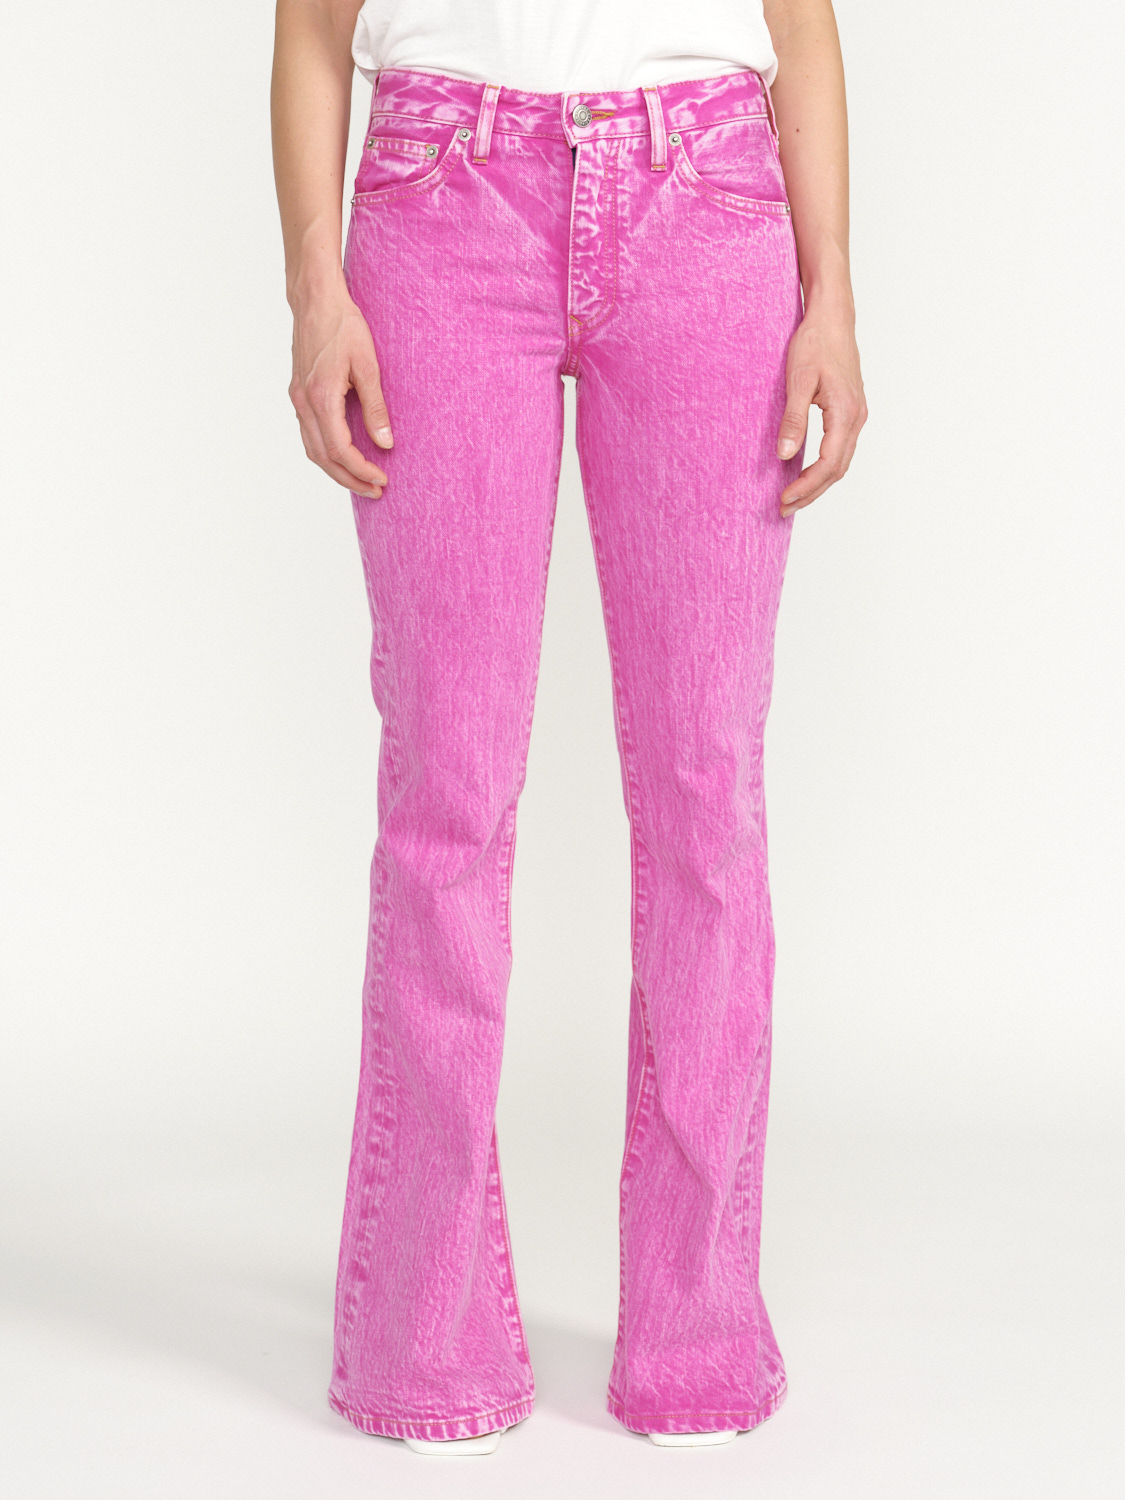 Cout De La Liberte Britney - denim flare pants with washed out look pink 25